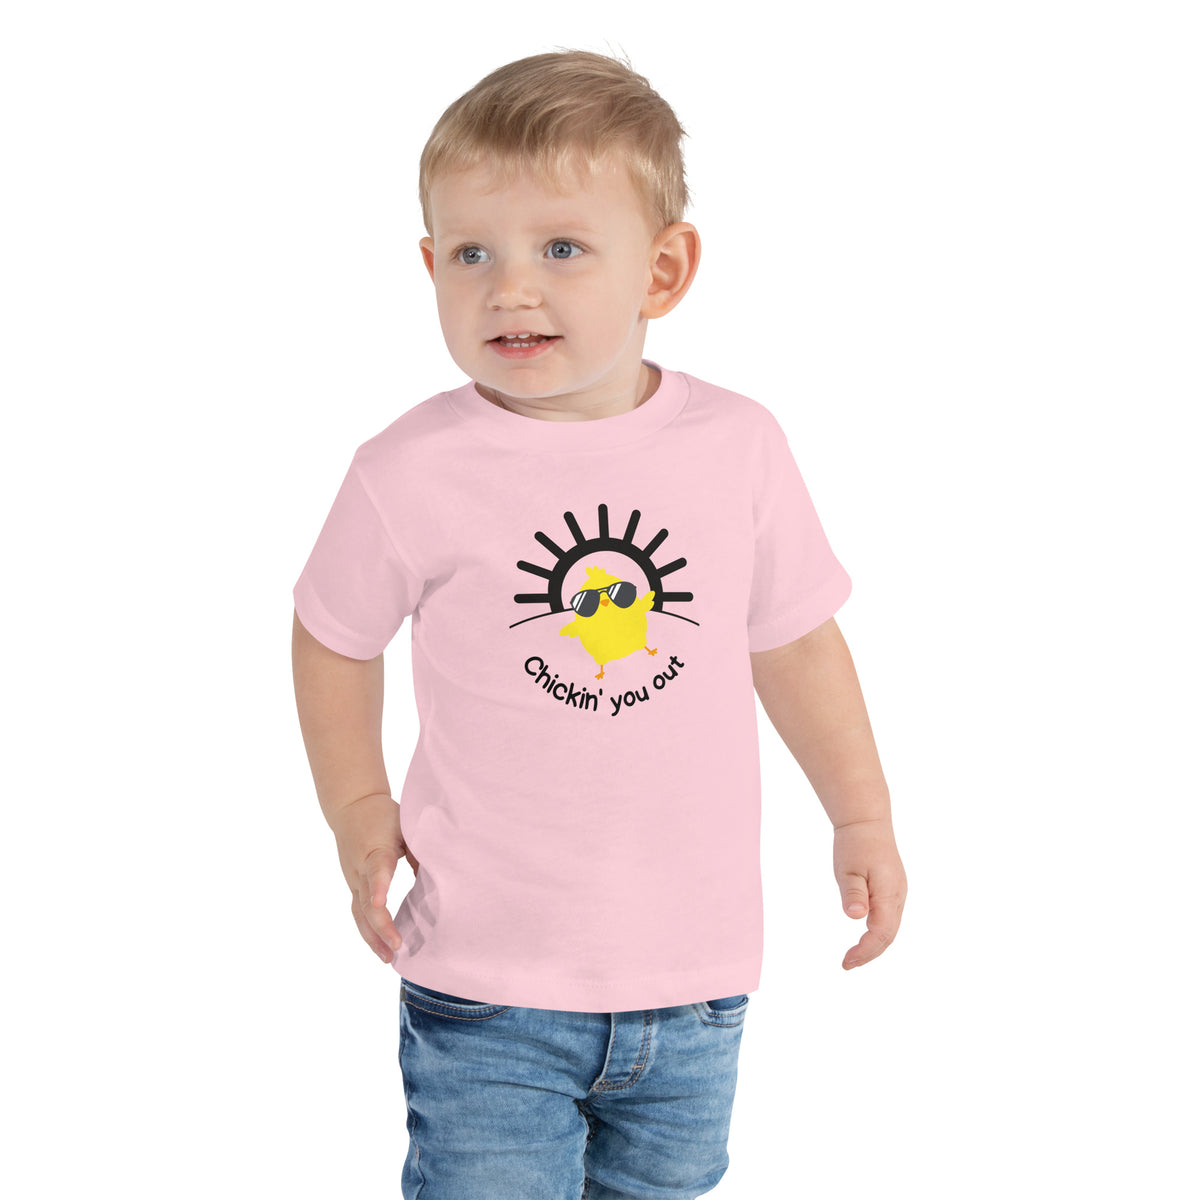 Chicken You Out Toddler Short Sleeve Tee